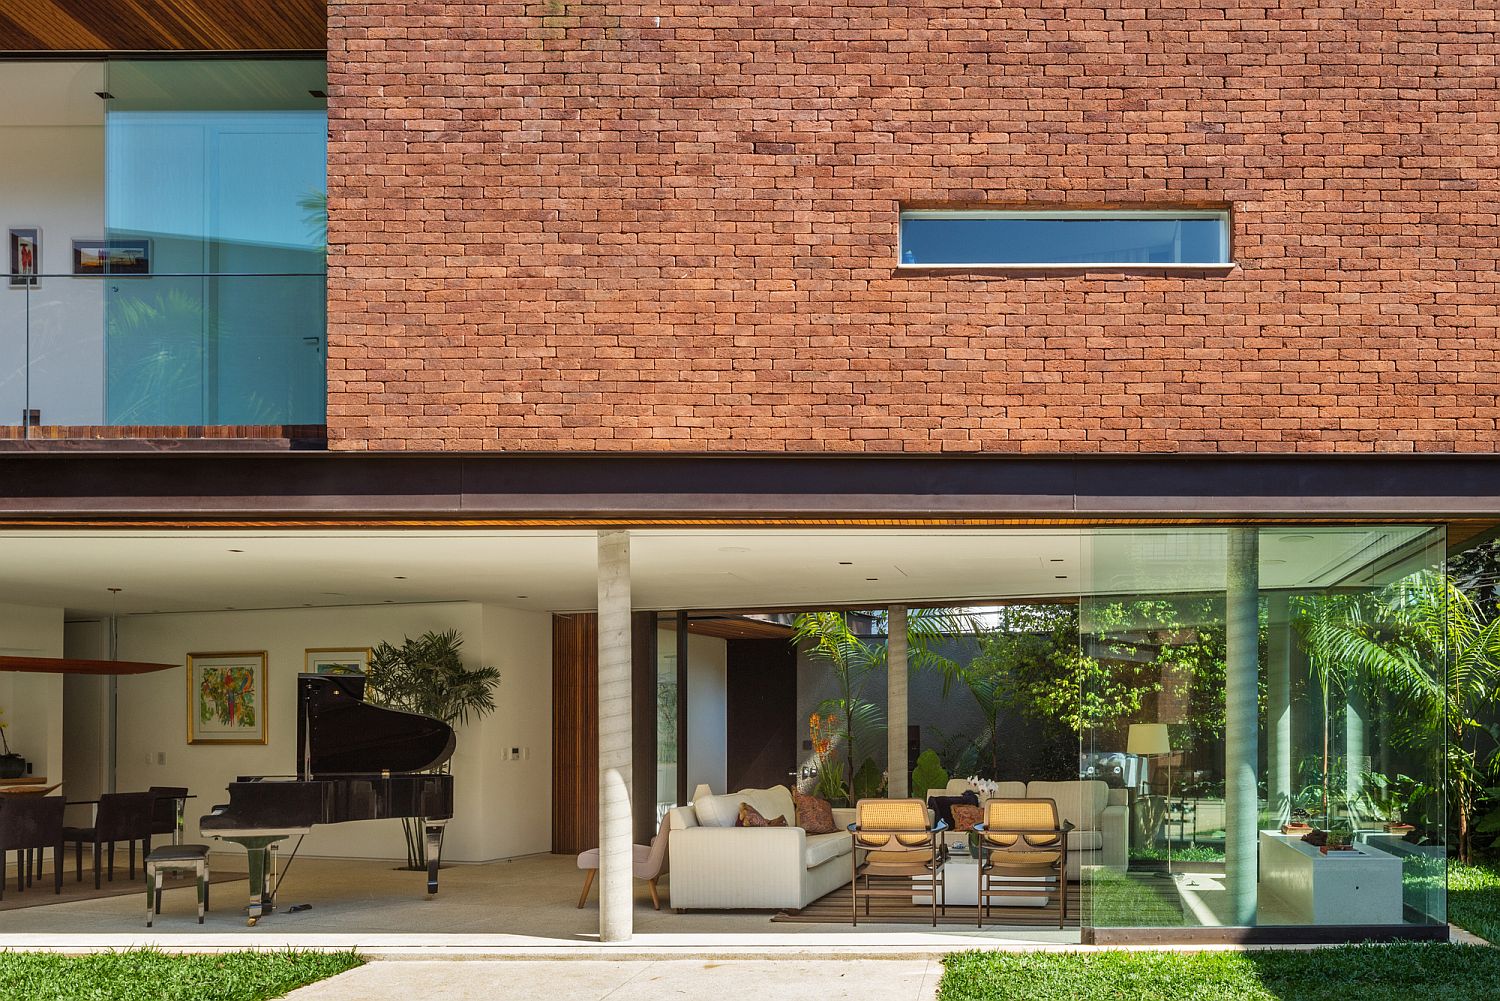 Brick wall adds unexpected textural contrast to the facade